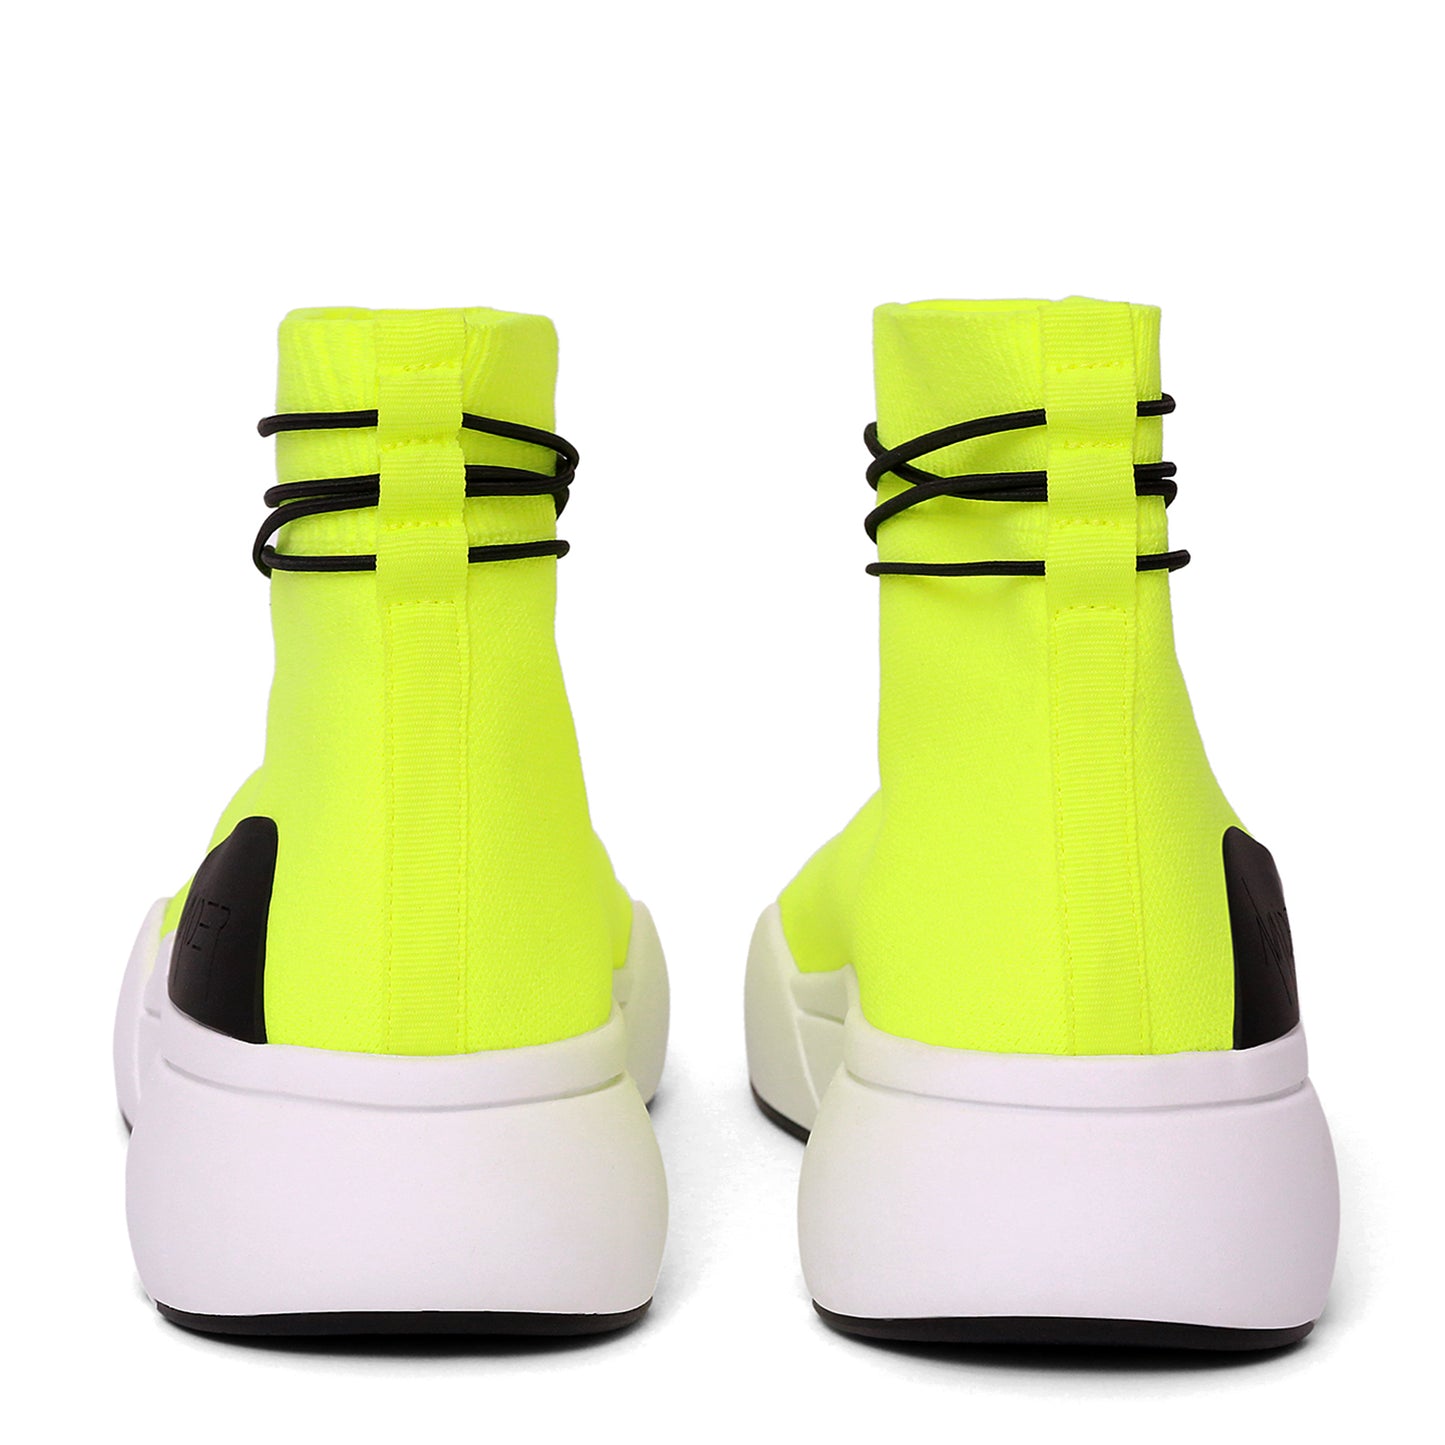 ELLIPSIS SOCK TRAINER IN NEON, BLACK AND WHITE